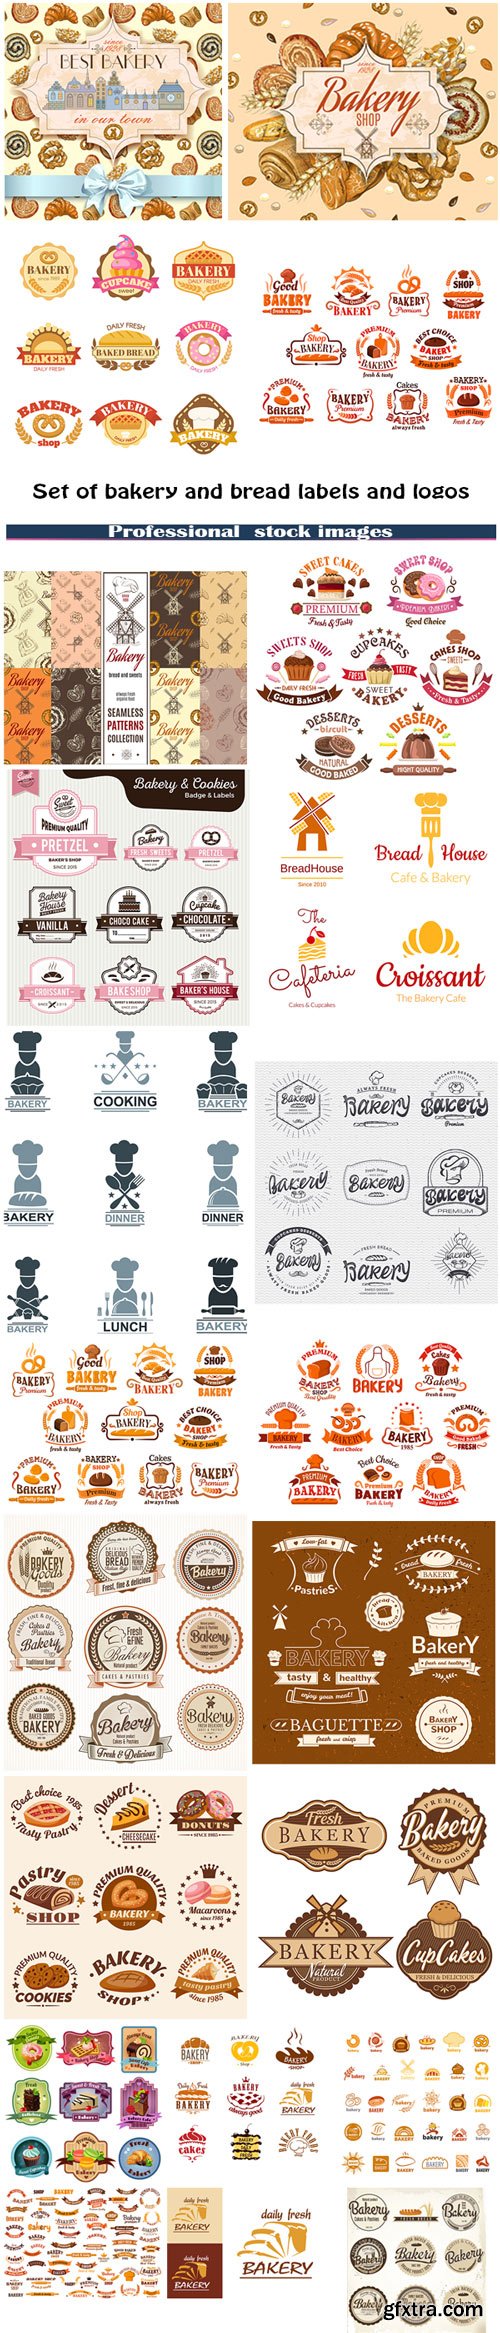 Set of bakery and bread labels and logos